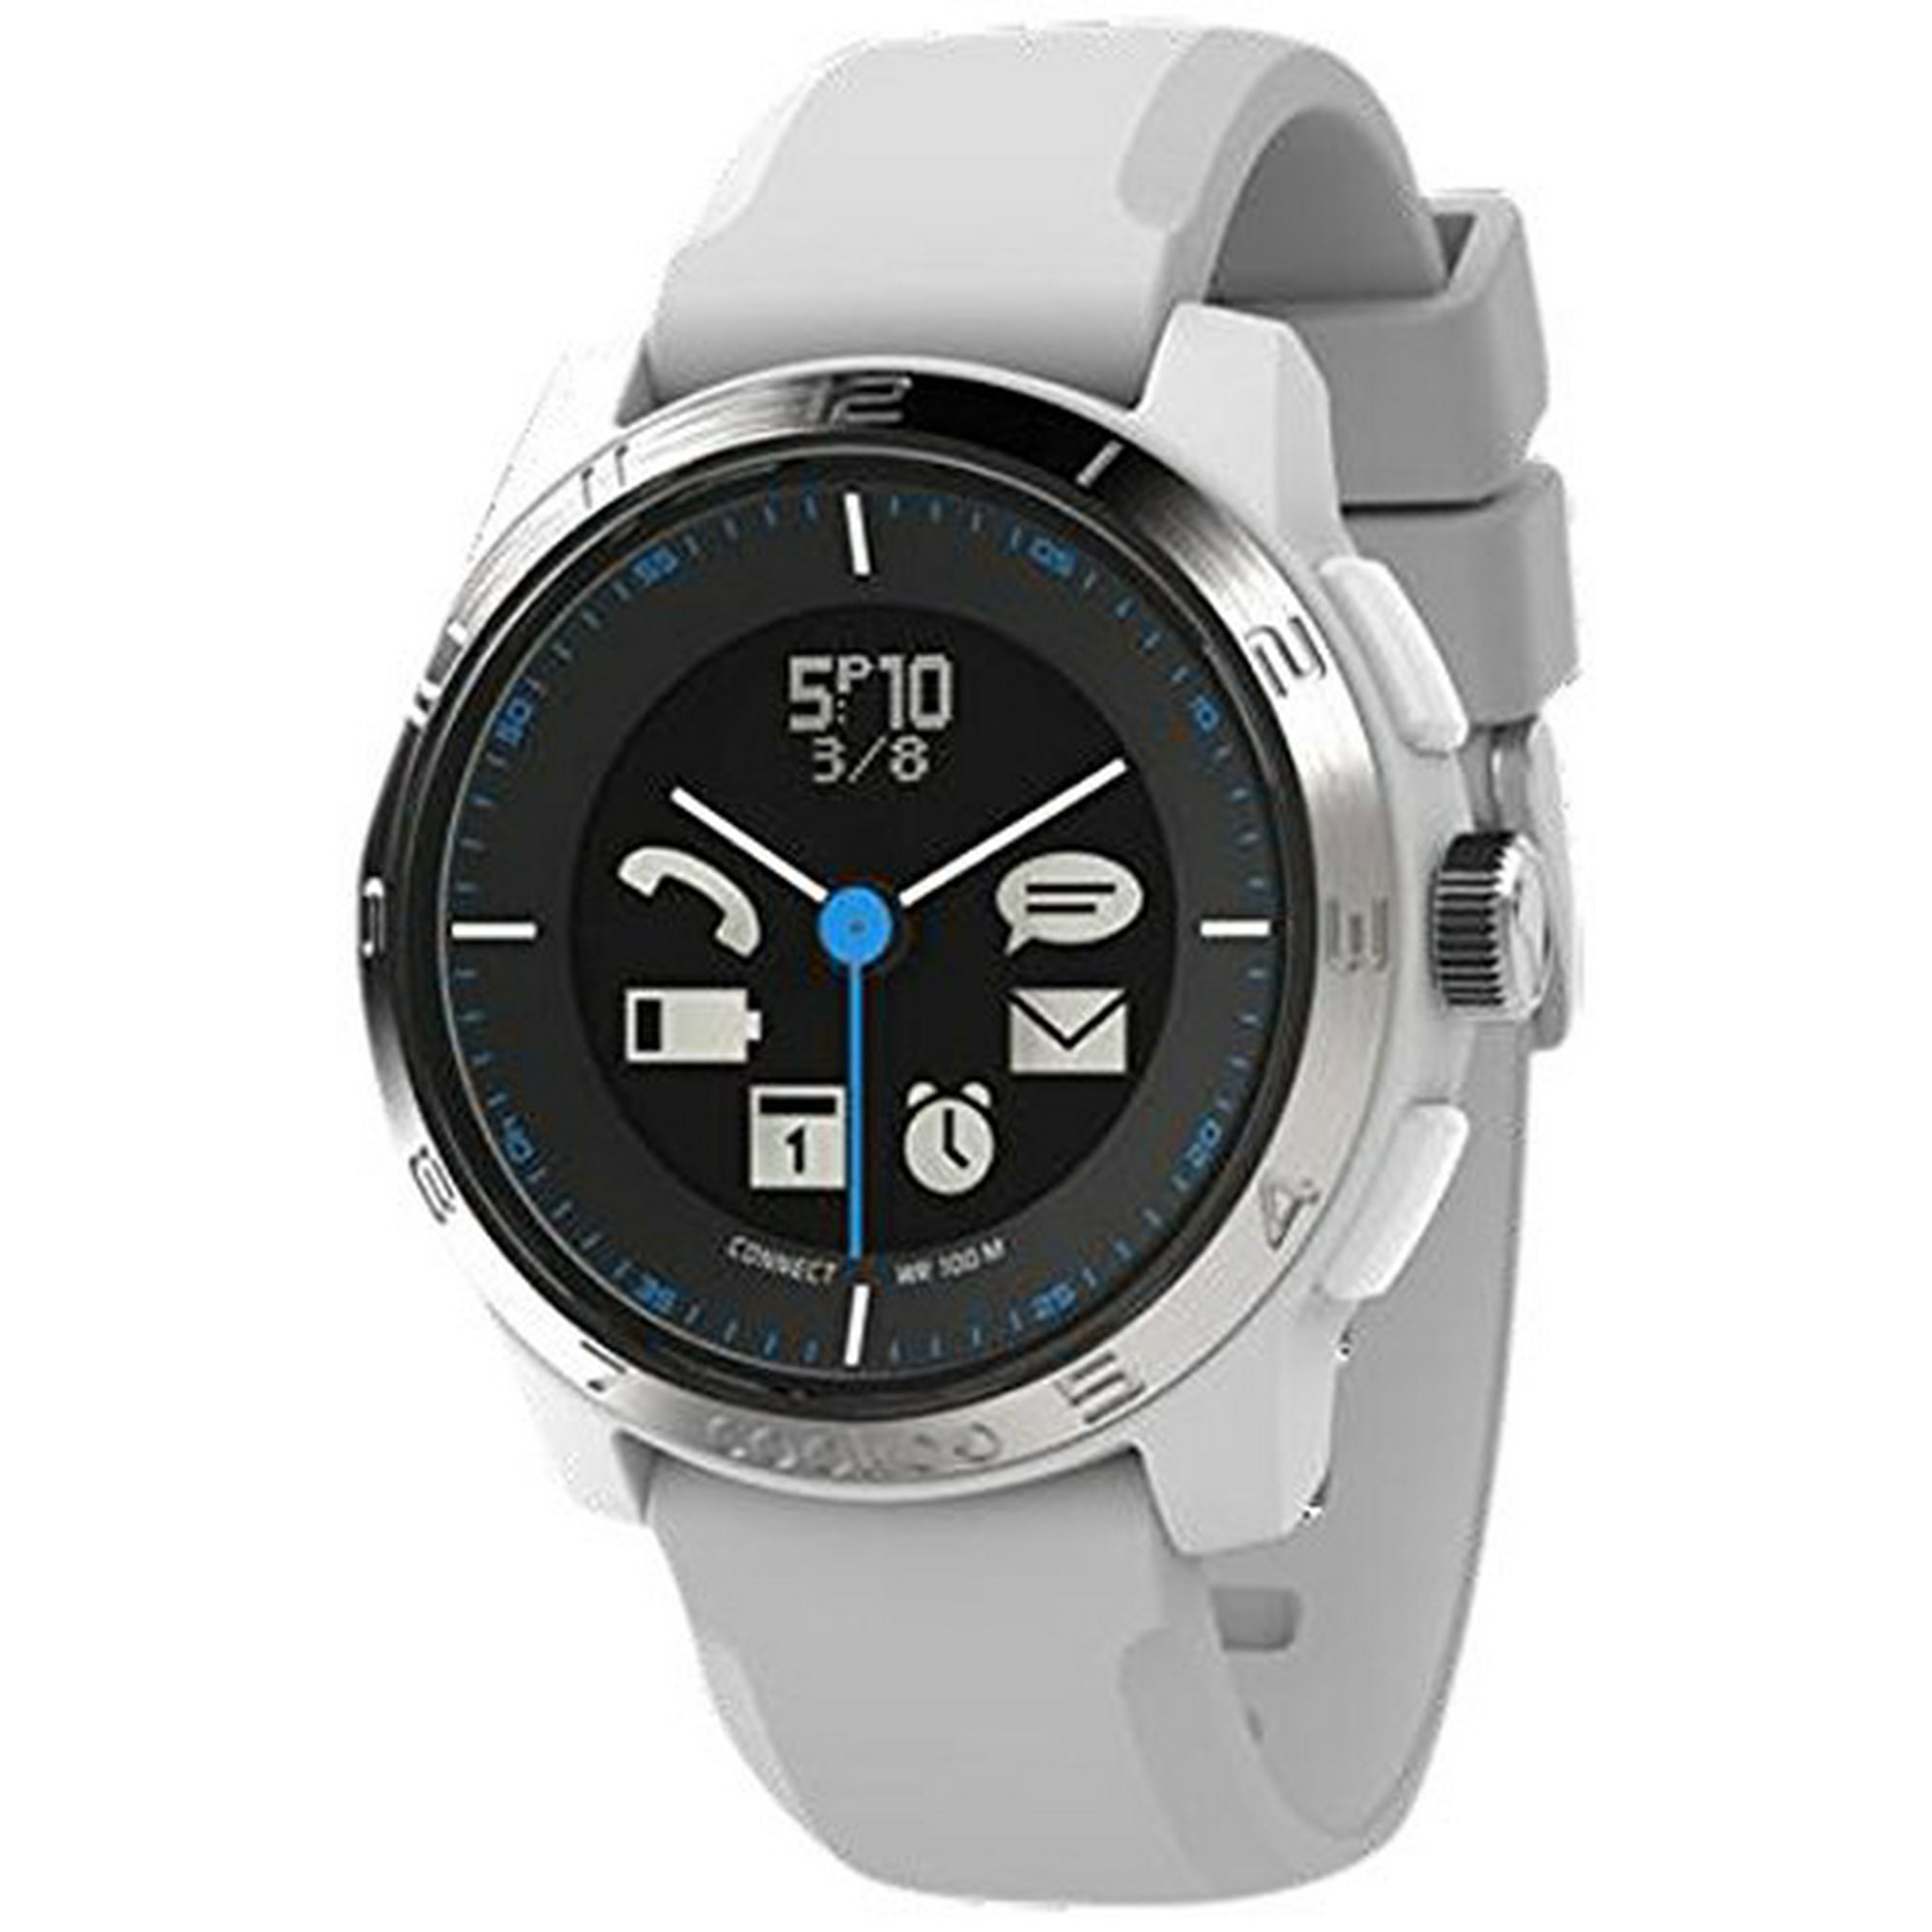 COOKOO Smart Bluetooth Connected Watch - White | Walmart 